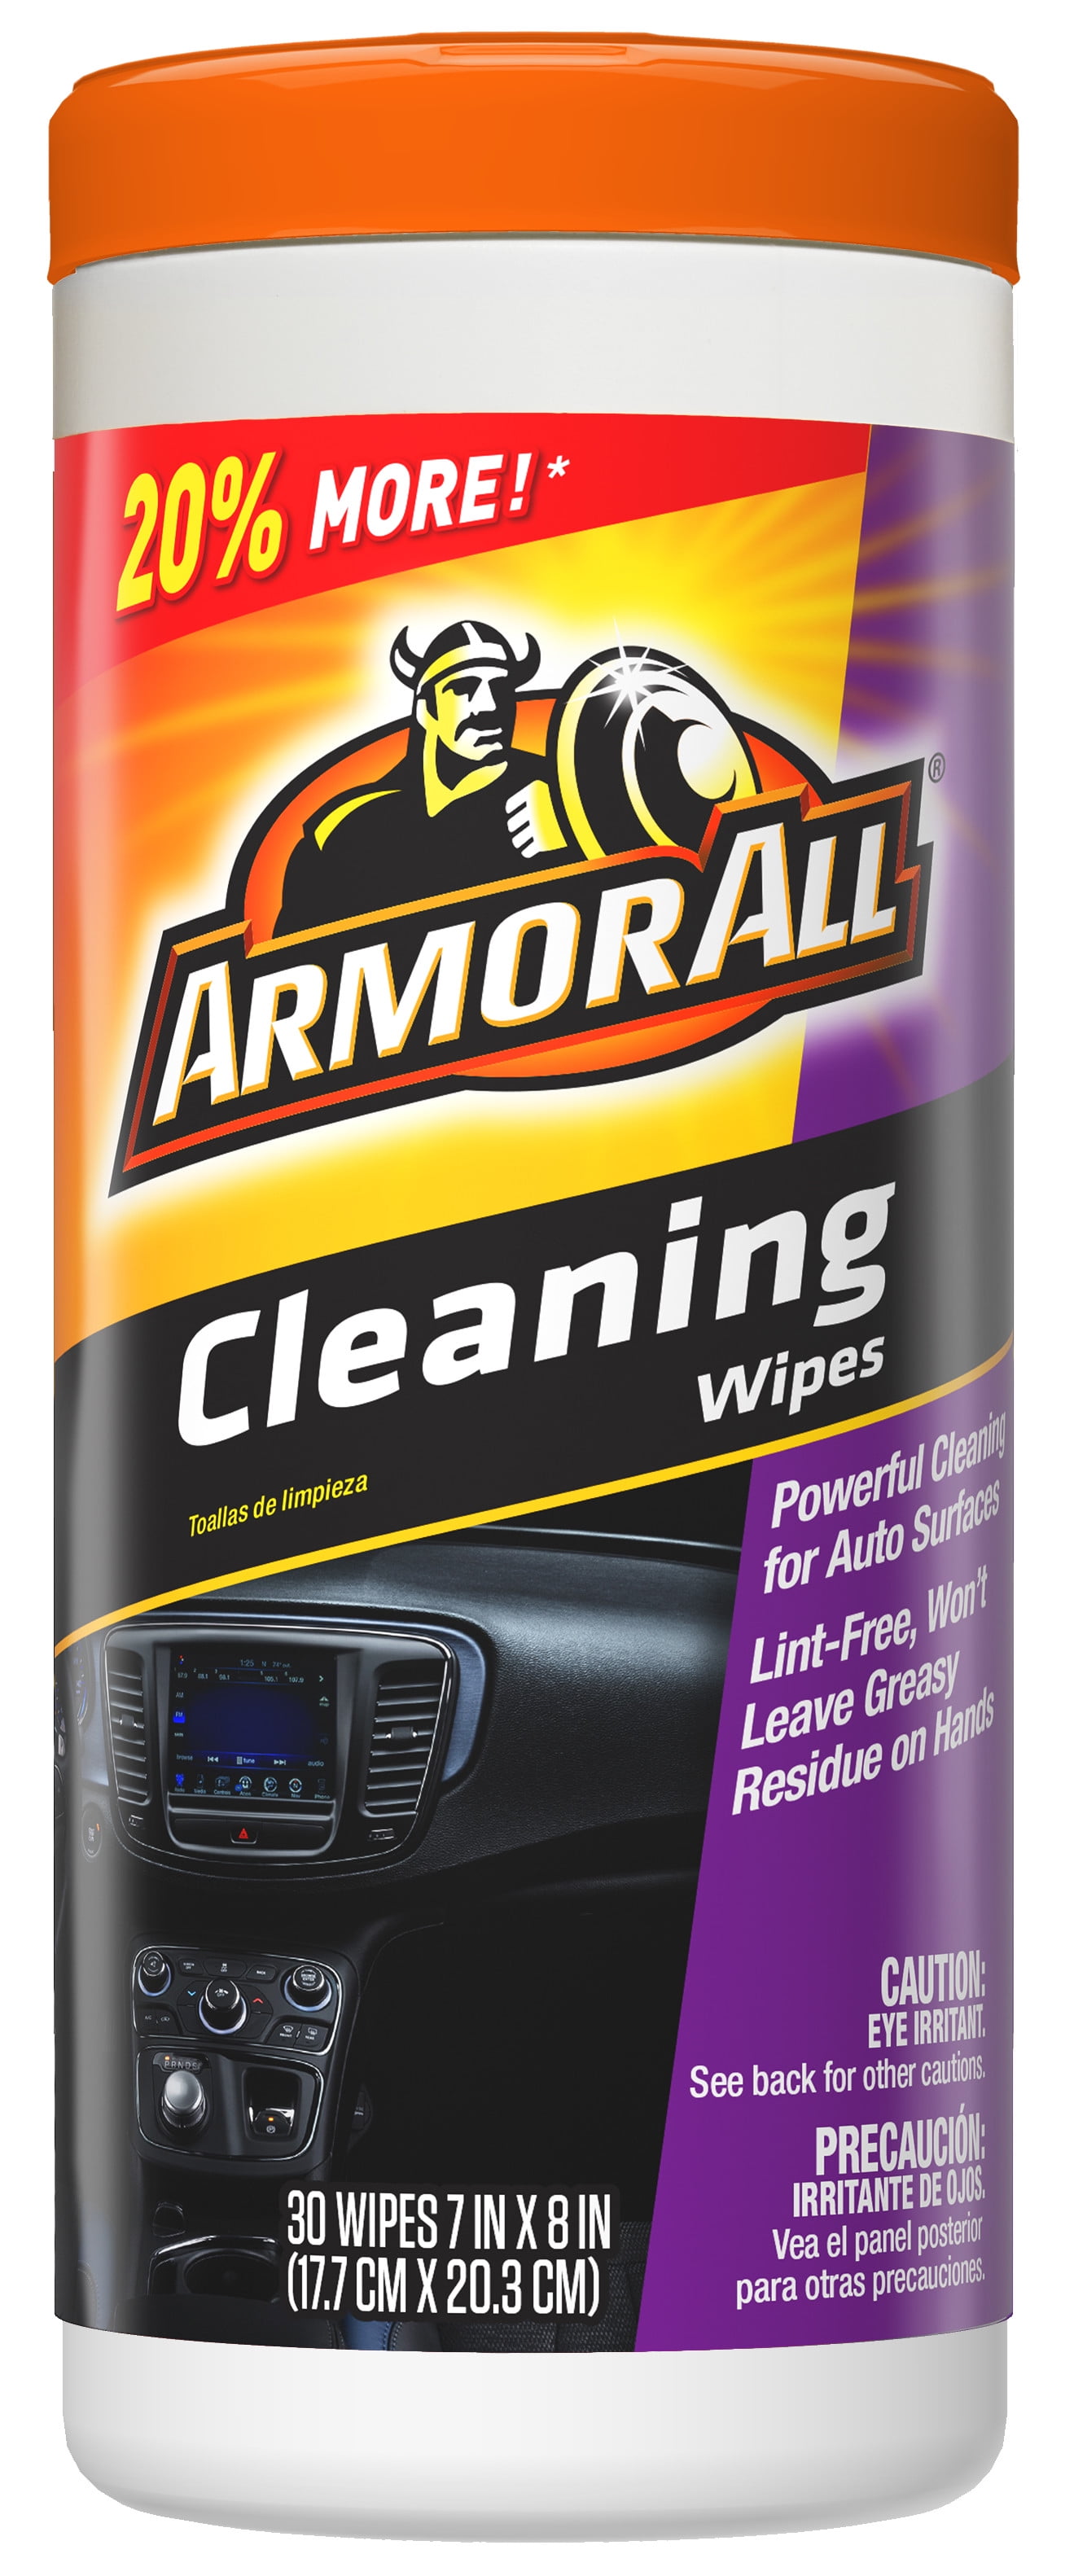 Armor All Cleaning Wipes, 30-Count